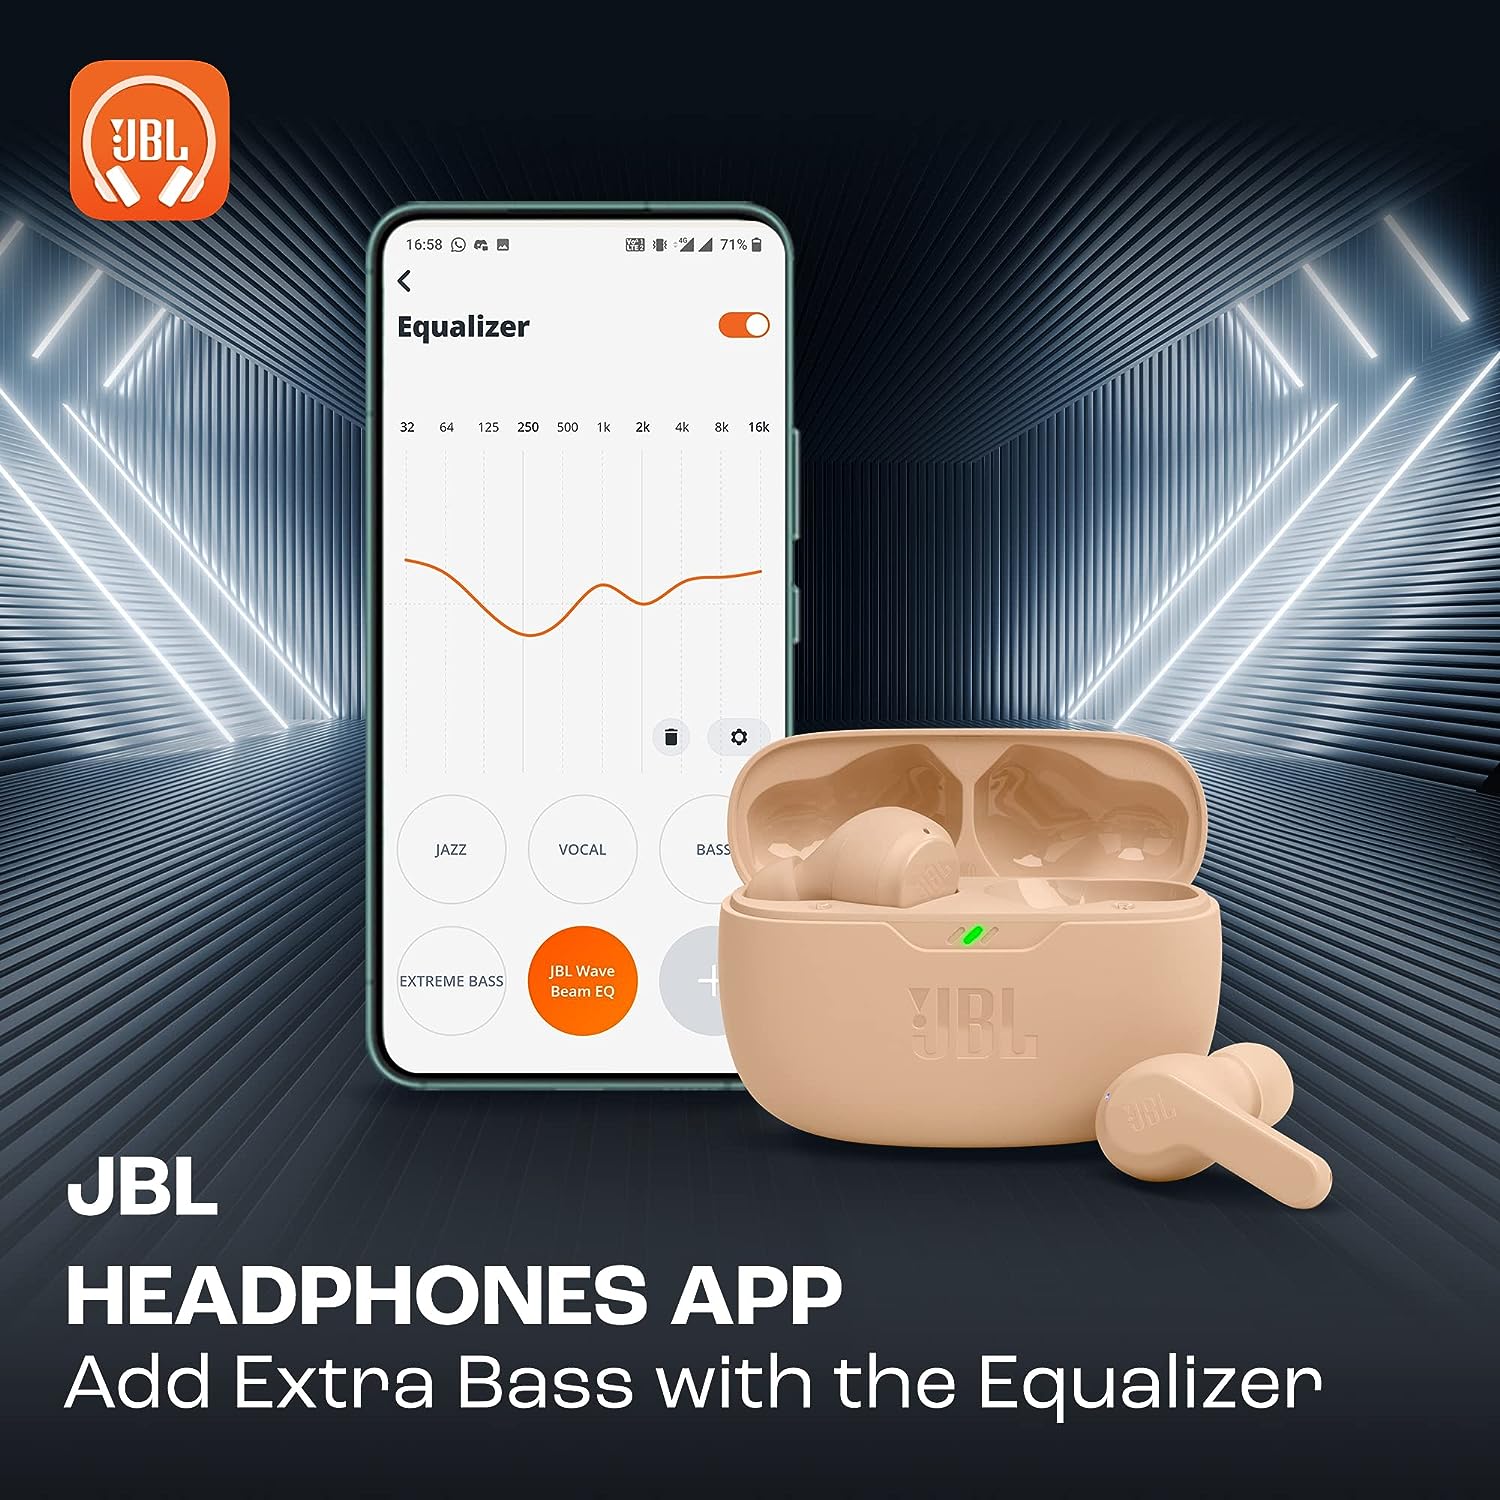 Talk-Thru, JBL Extra and Aware (Beige) Google with EQ, (TWS) Wave – & Beam App Customized Quick Mic, Dust Ambient Bass & Charge, IP54 32 in-Ear Earbuds for Water Resistance, Battery FastPair Hours